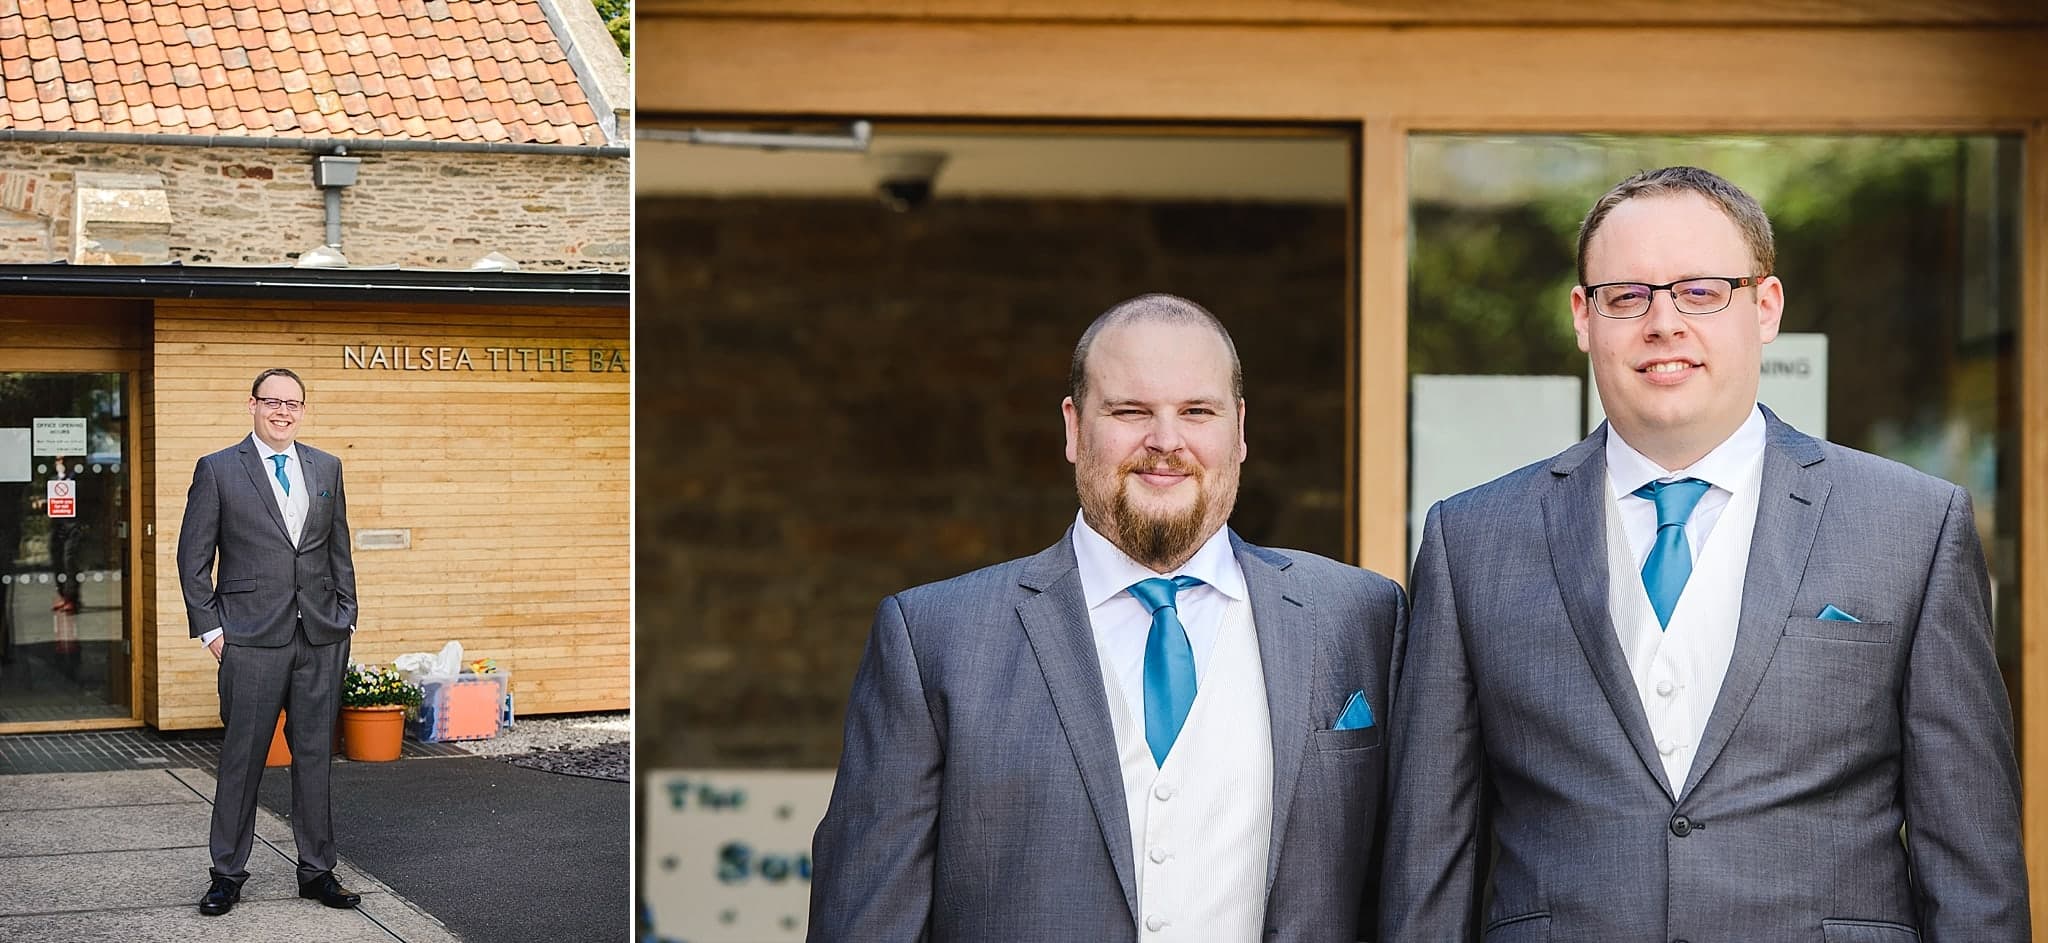 The groom with his best man stood outside Nailsea Tithe Barn